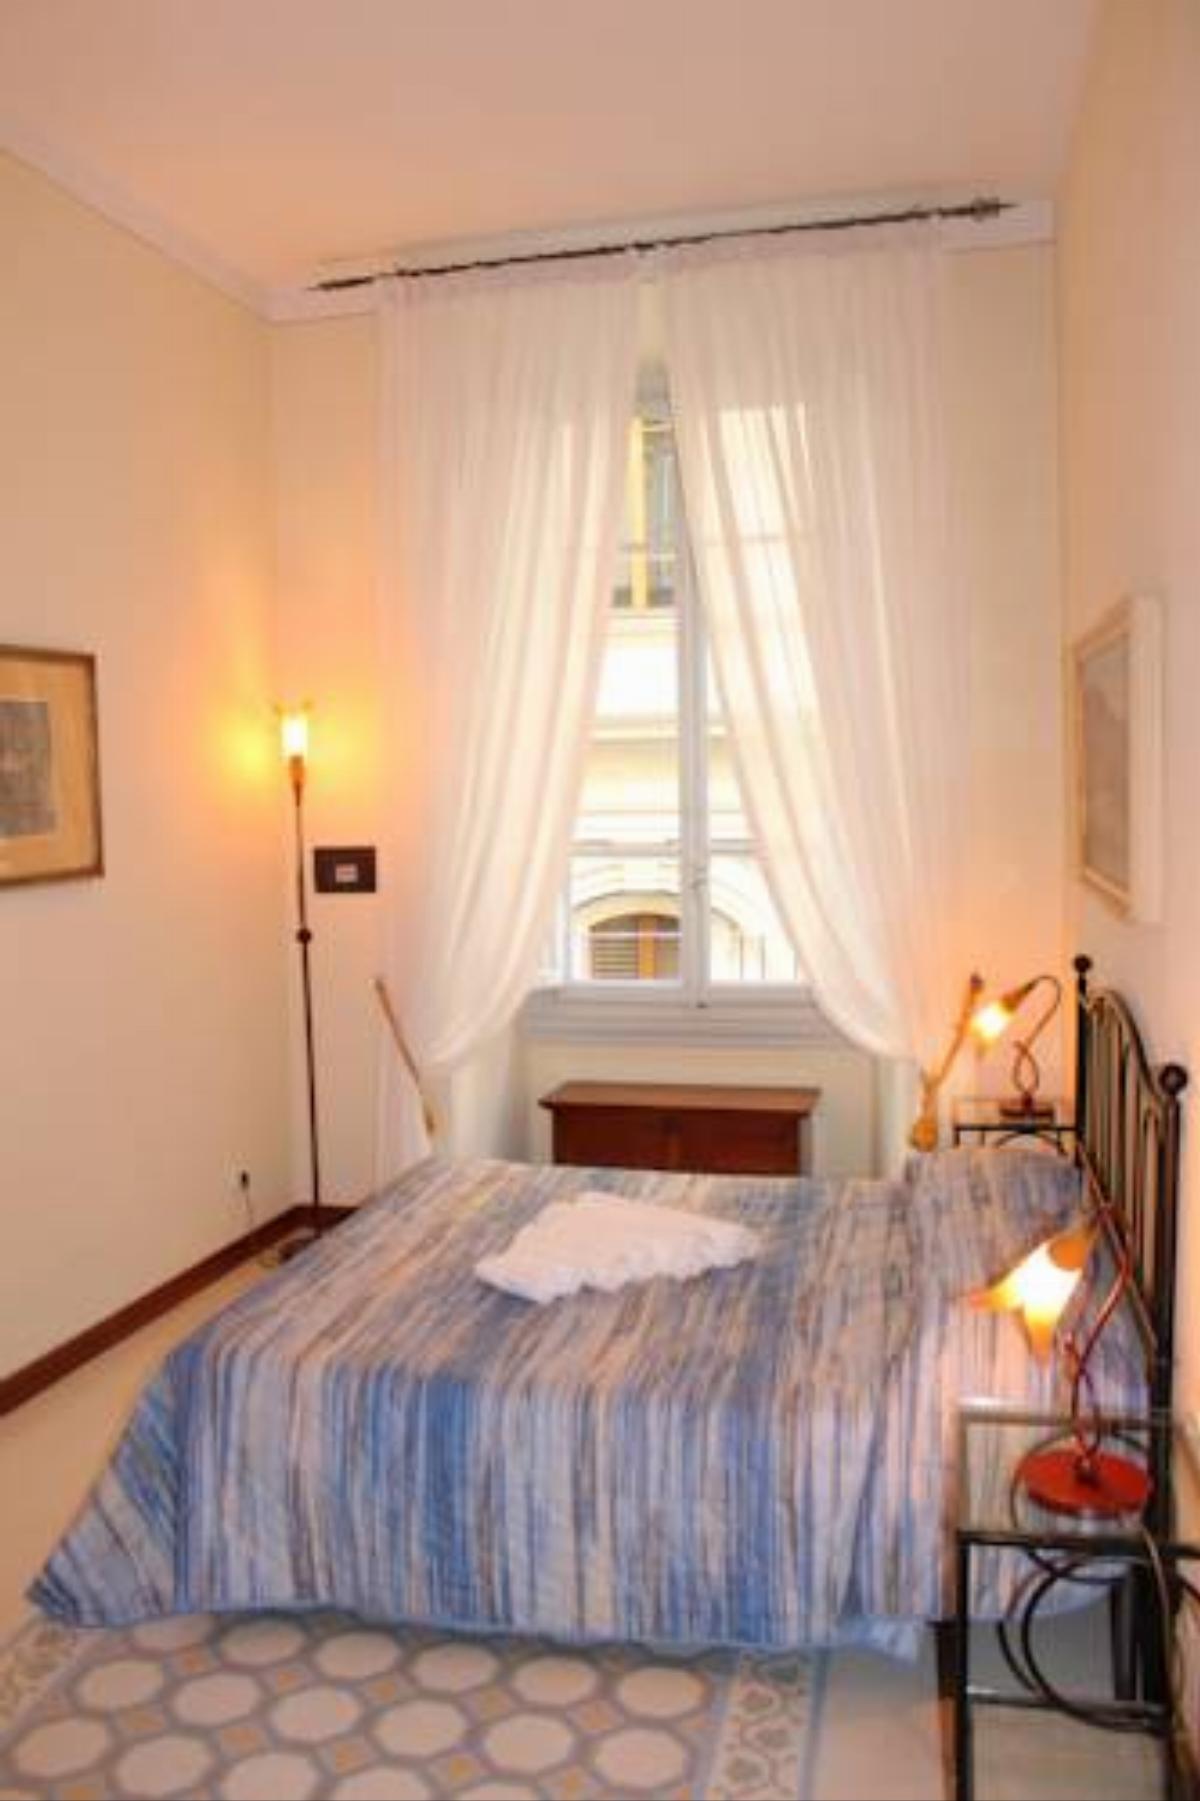 ViaRoma Suites - Florence Hotel Florence Italy